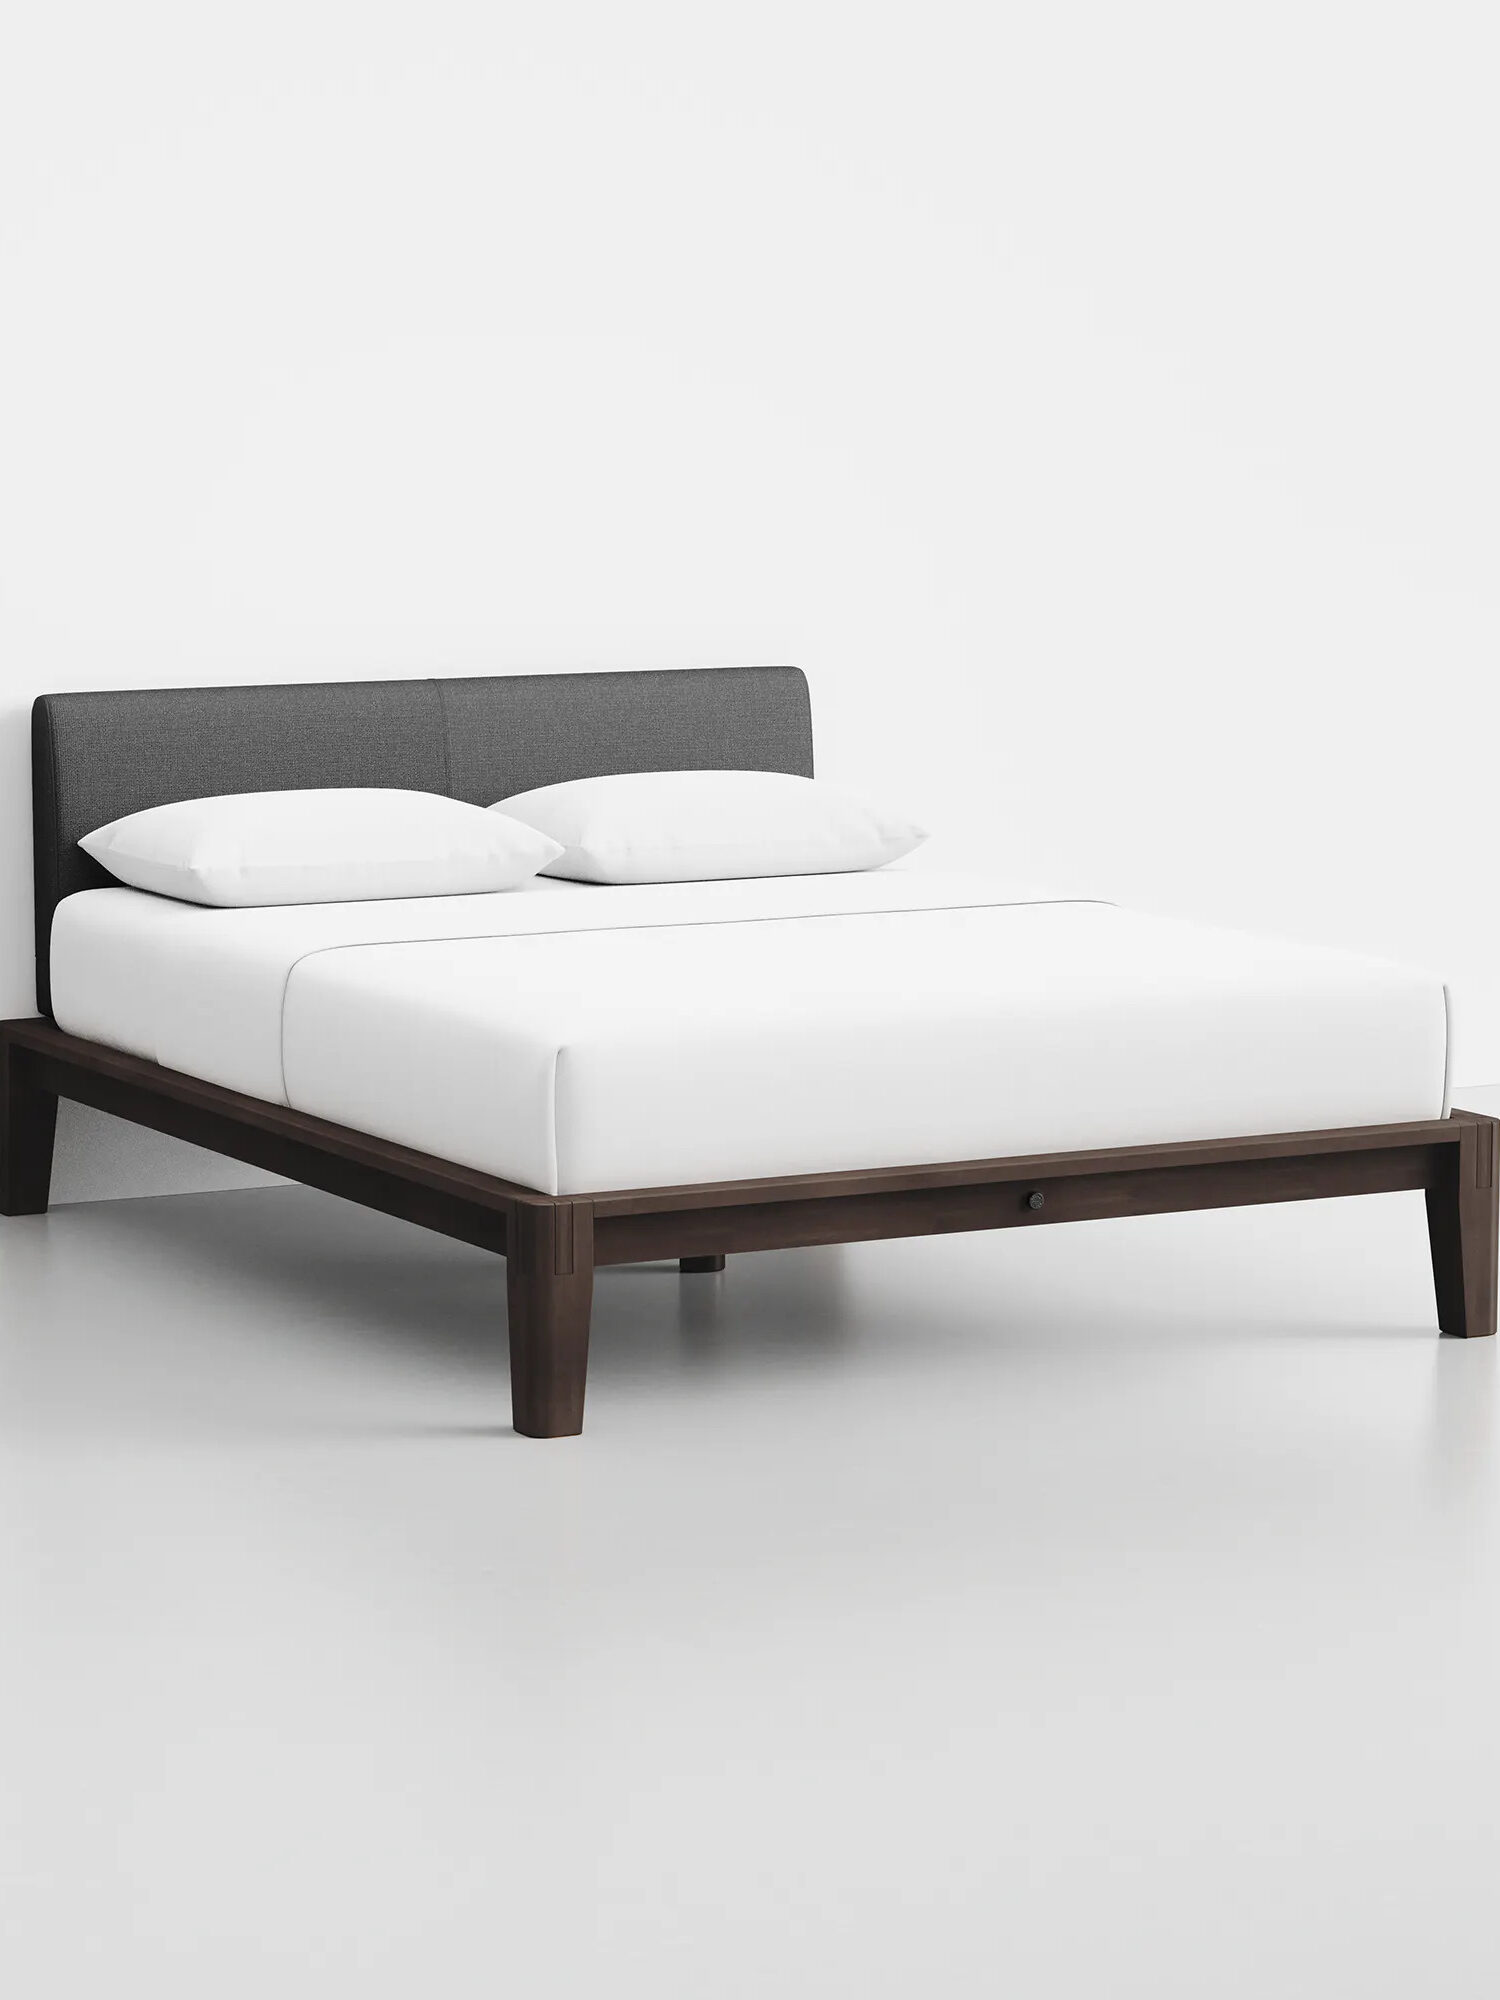 A wooden upholstered bed frame by Thuma.